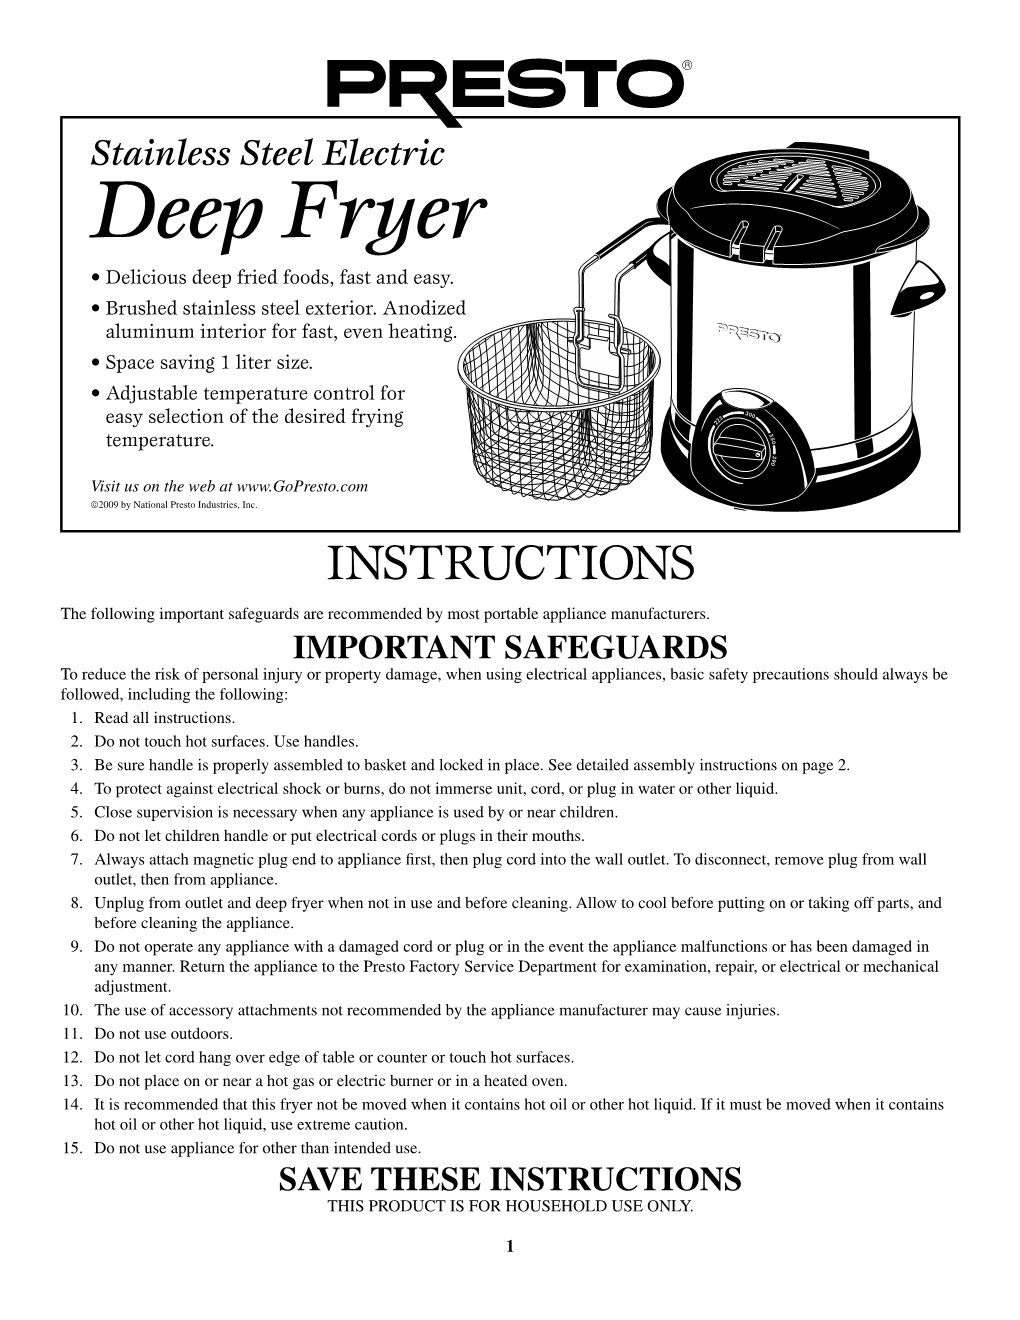 Deep Fryer • Delicious Deep Fried Foods, Fast and Easy